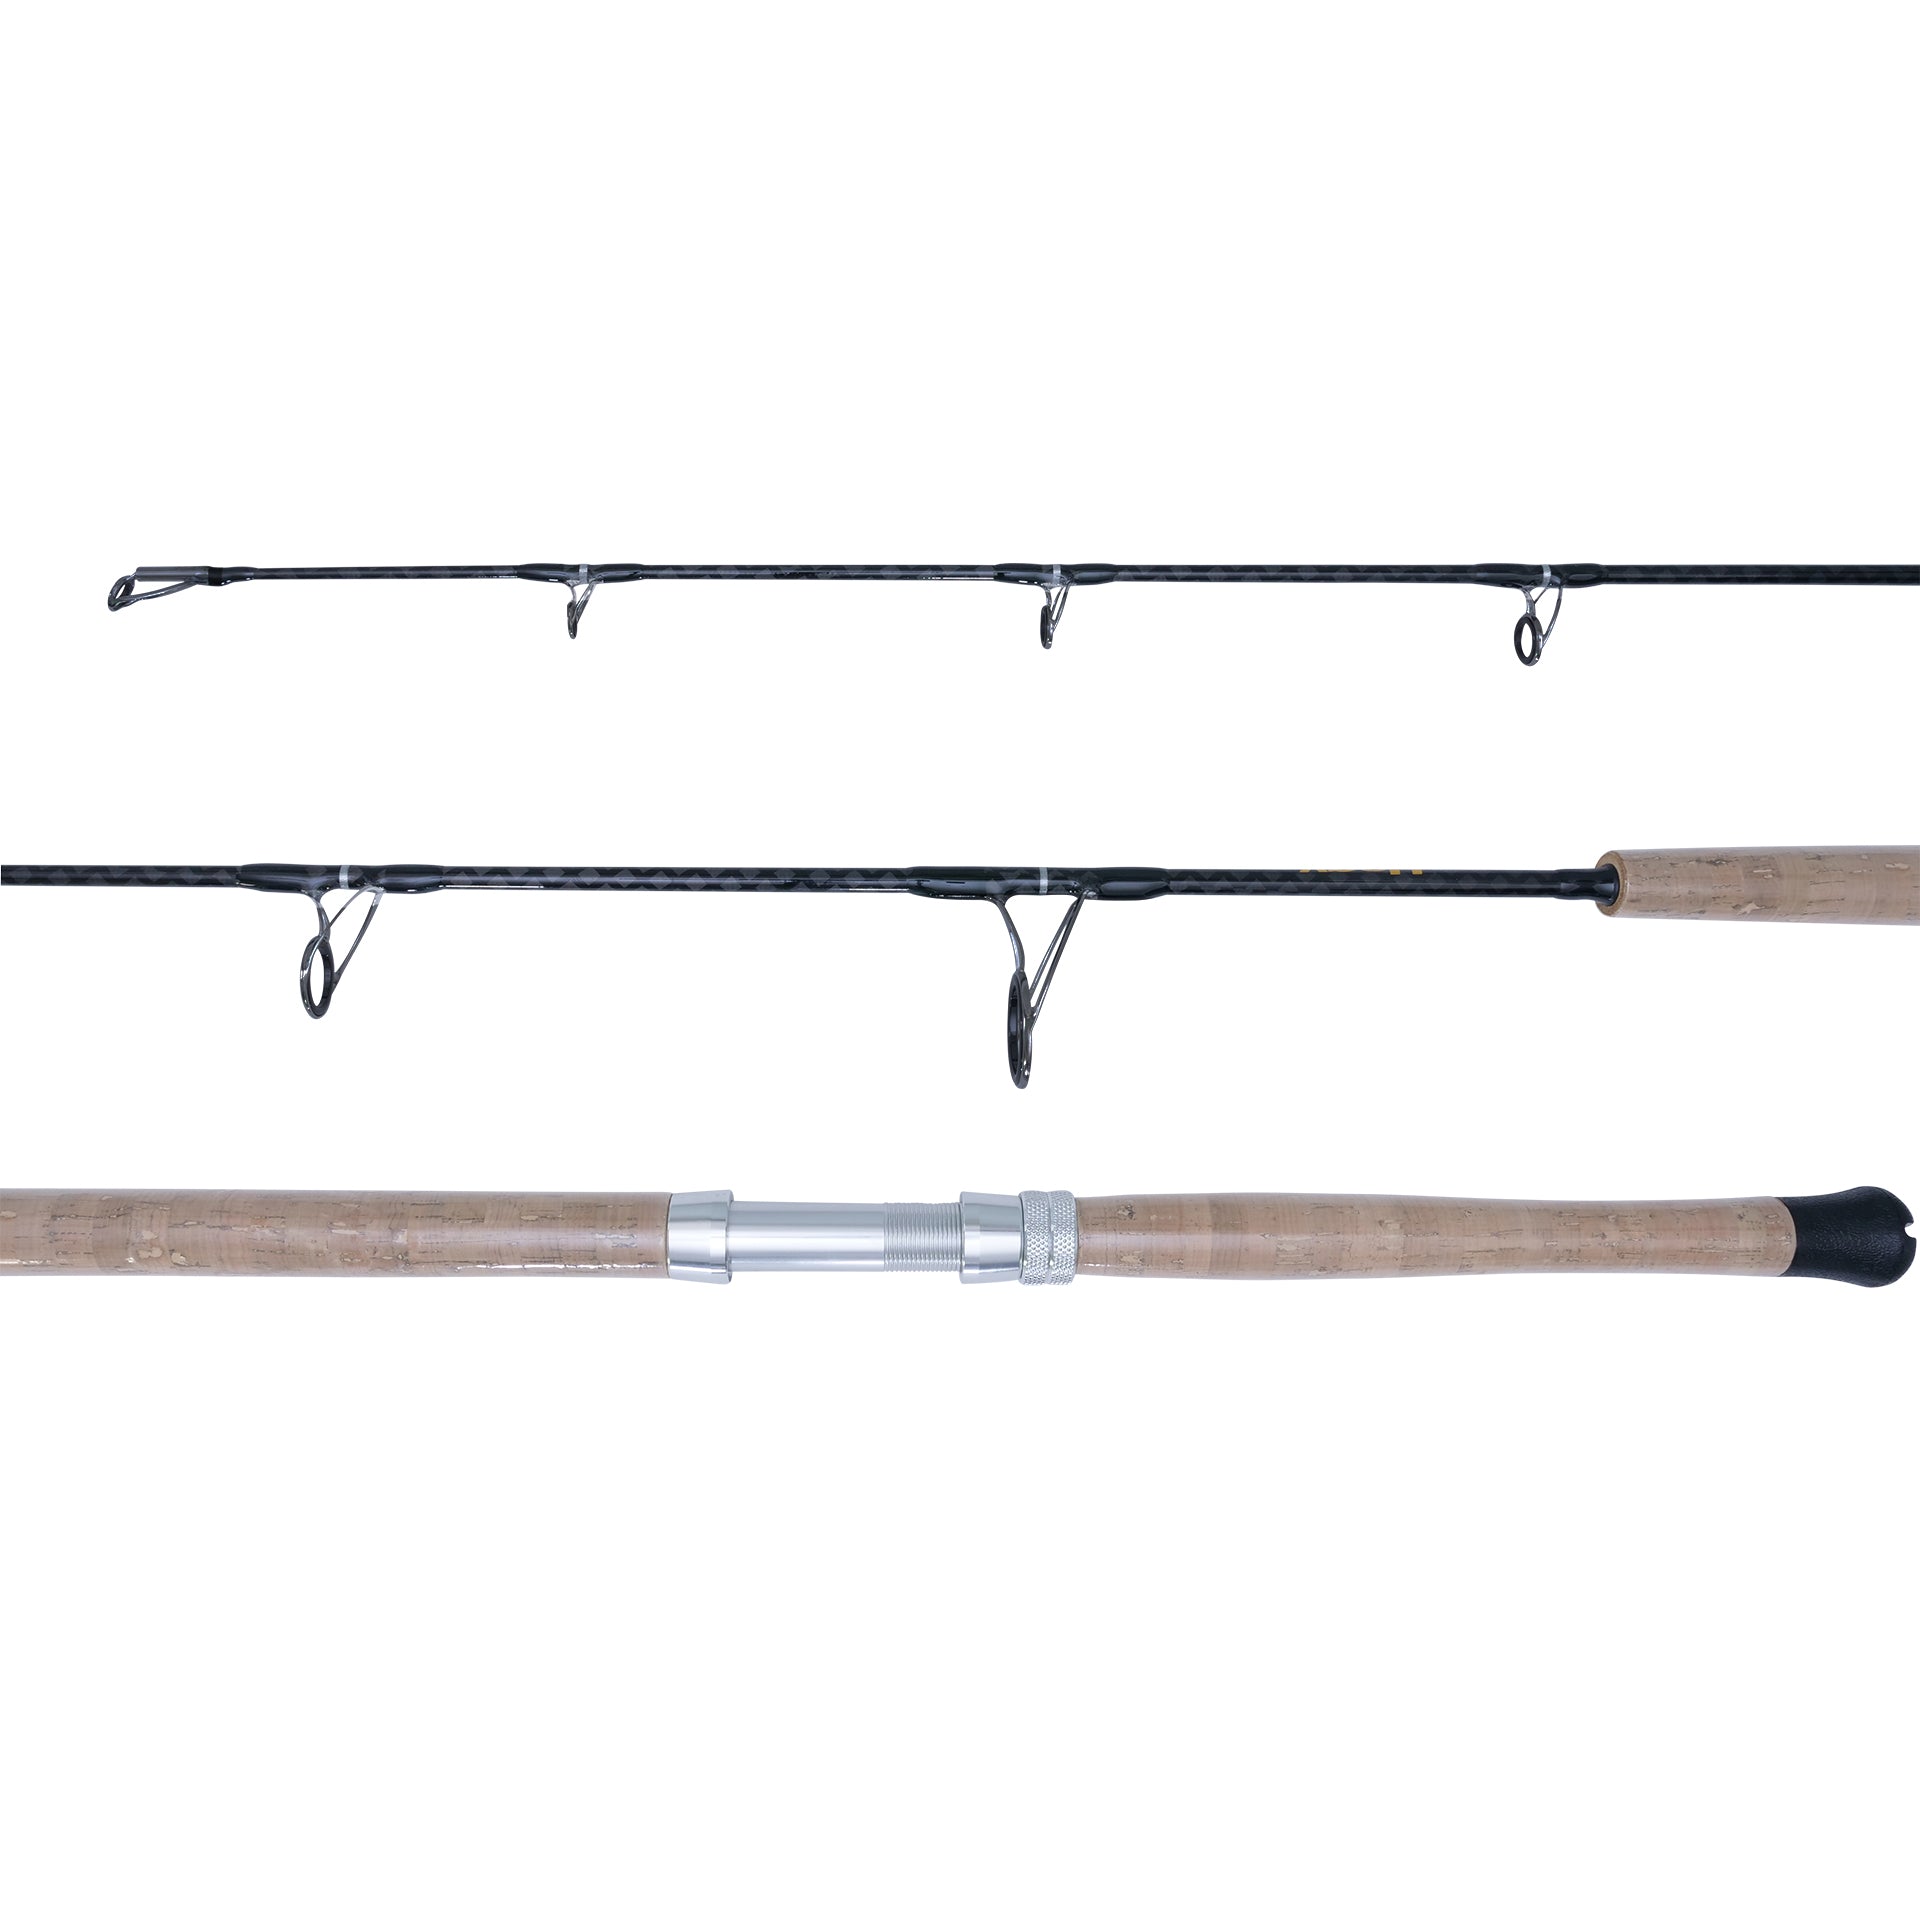 Pre-Order: Tuna Jigging Spinning Rod: Mod-Fast Action 5' 9" MH (4oz - 16oz) (Ship Date 4/22)